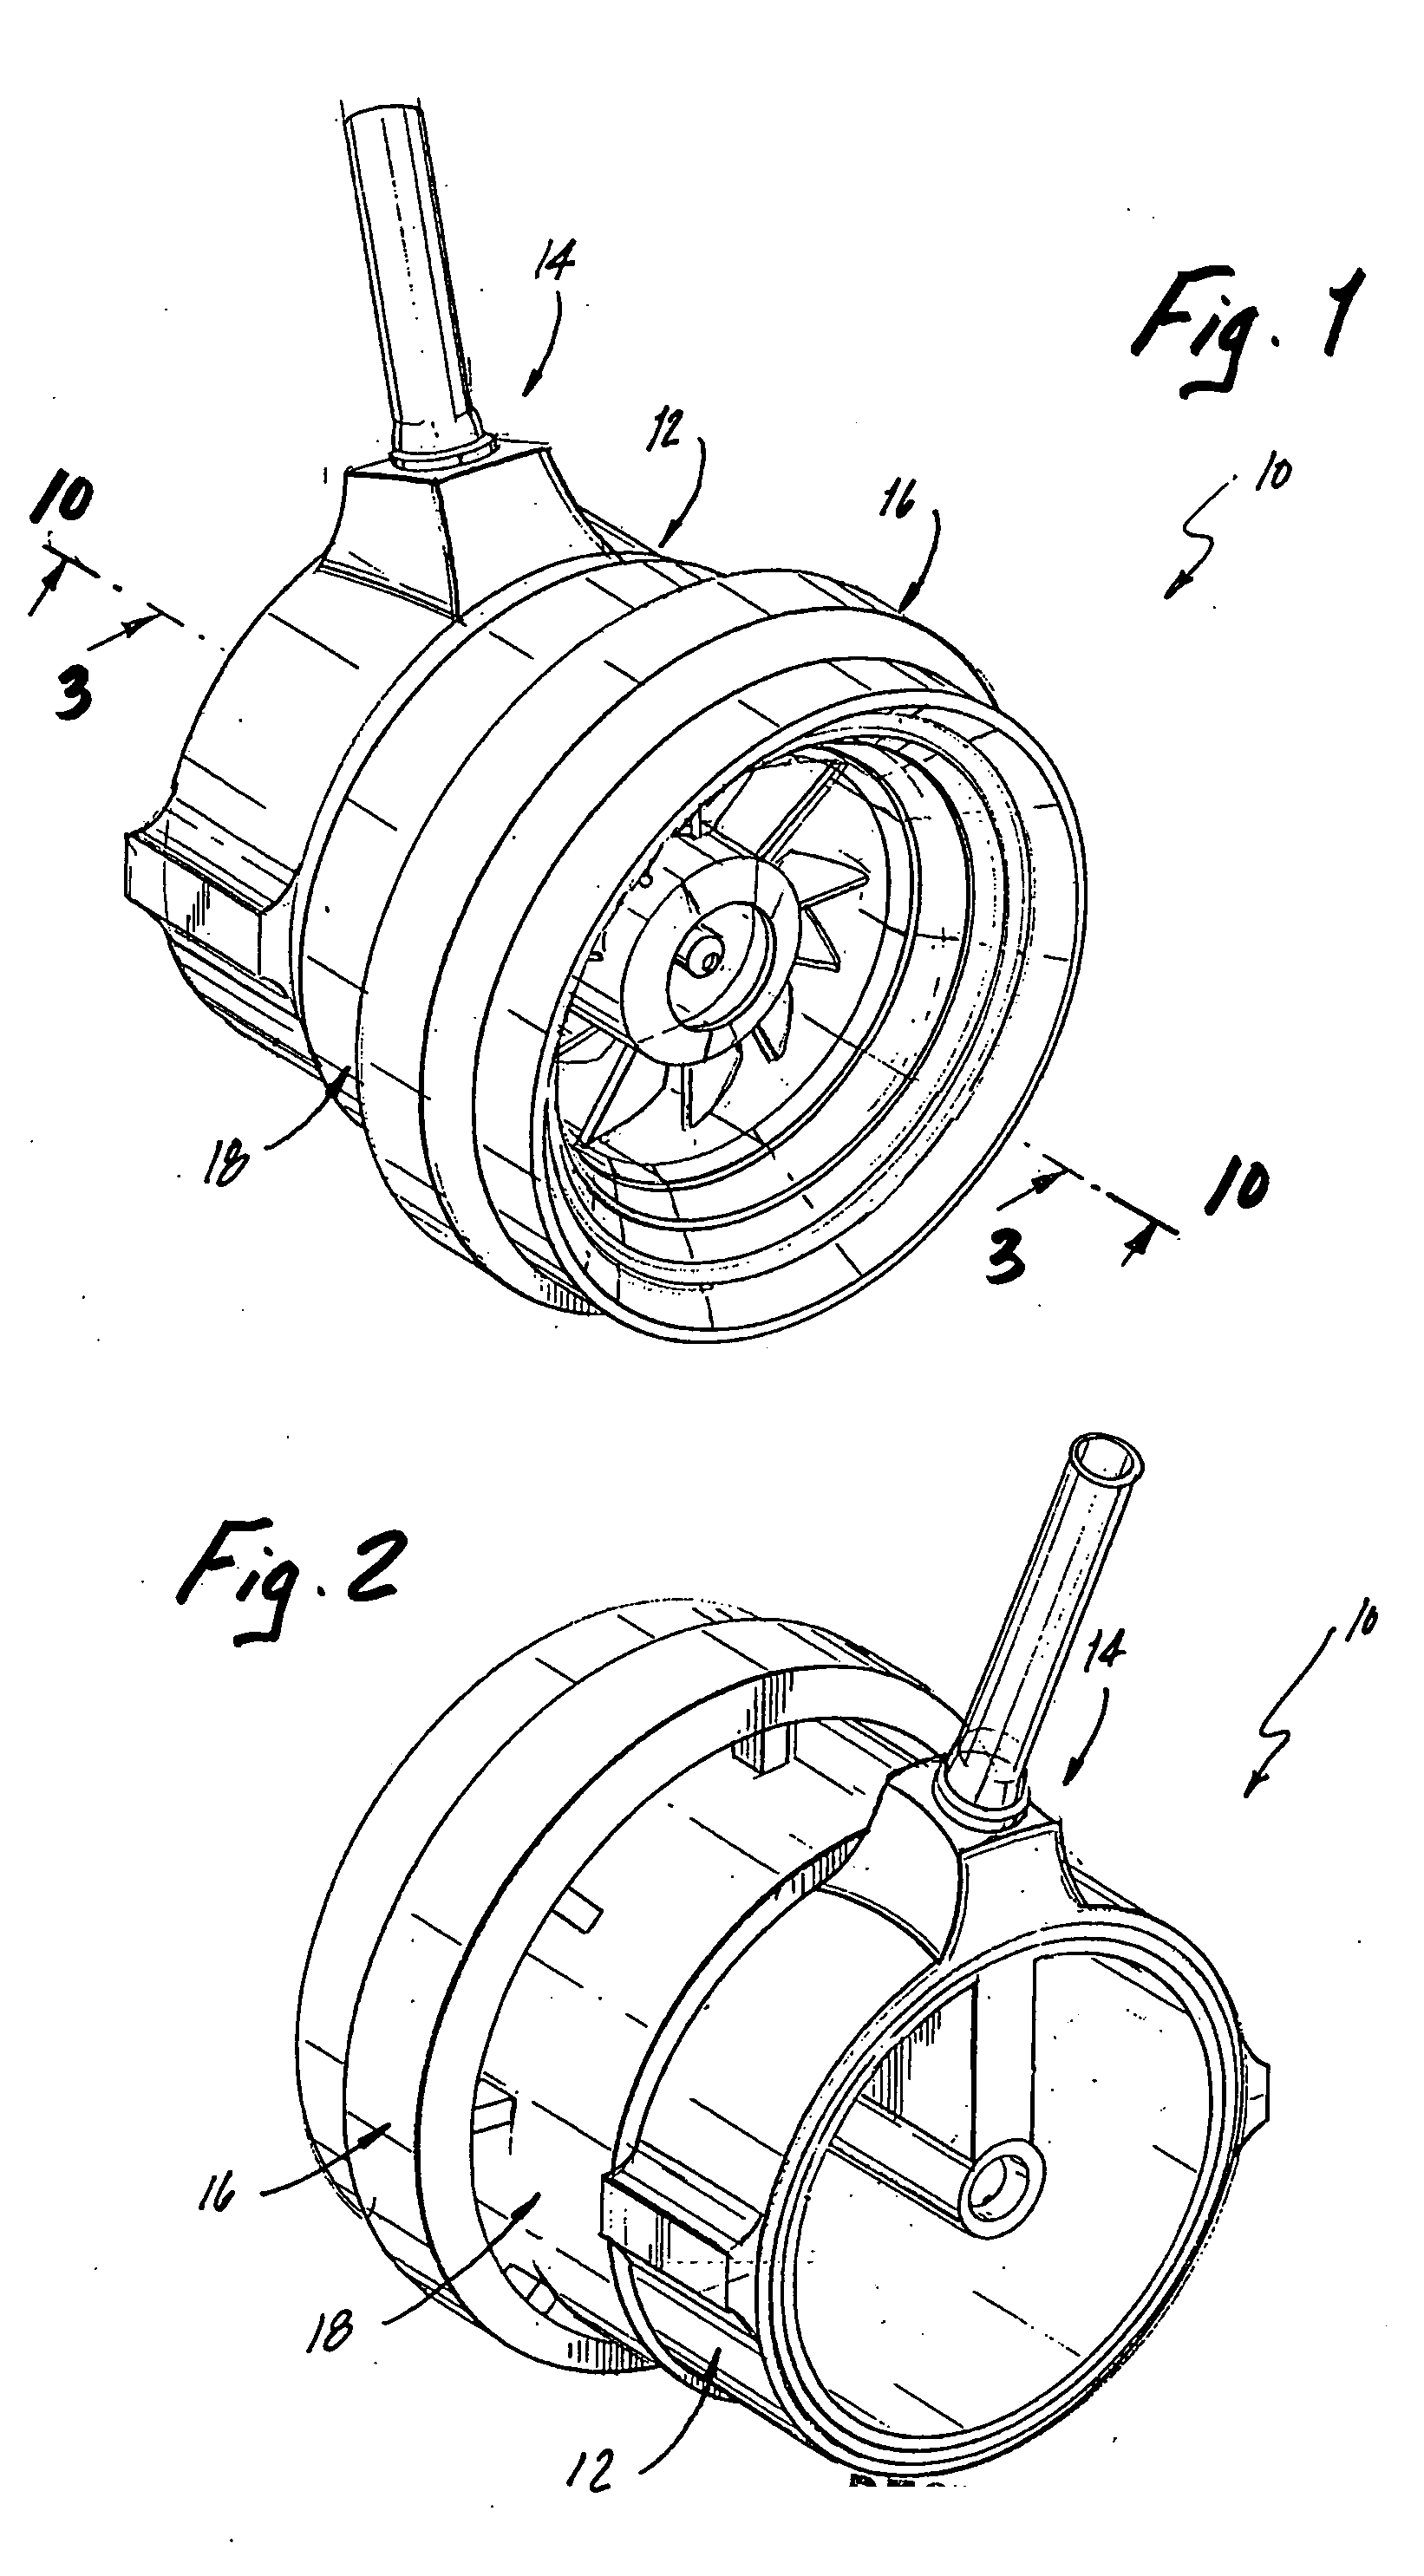 System and method for cooling a staged airblast fuel injector